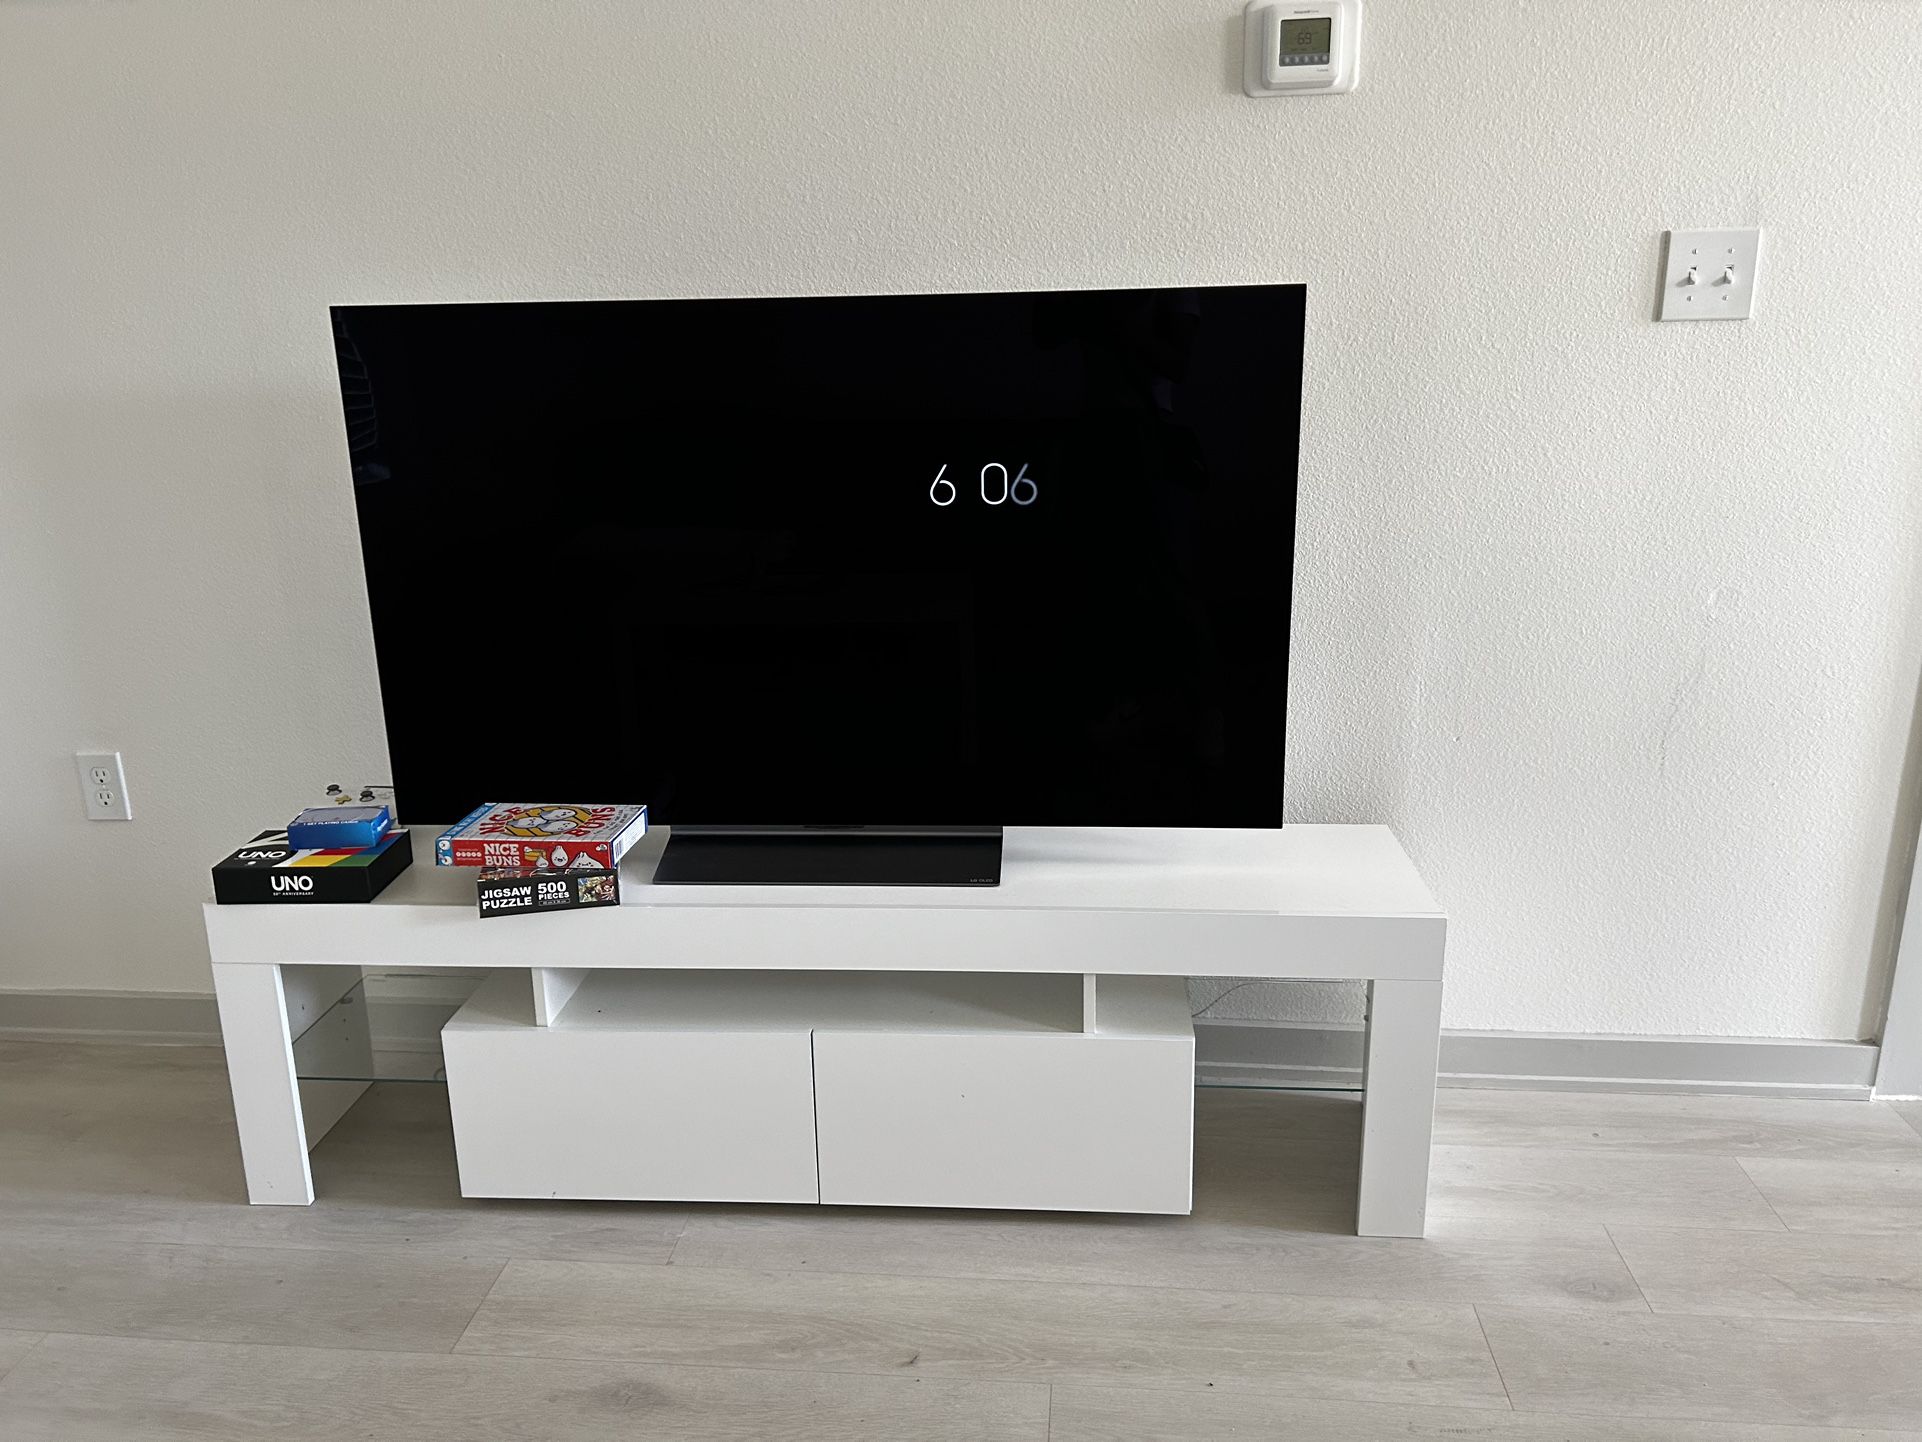 LG OLED 55” Tv And Stand 